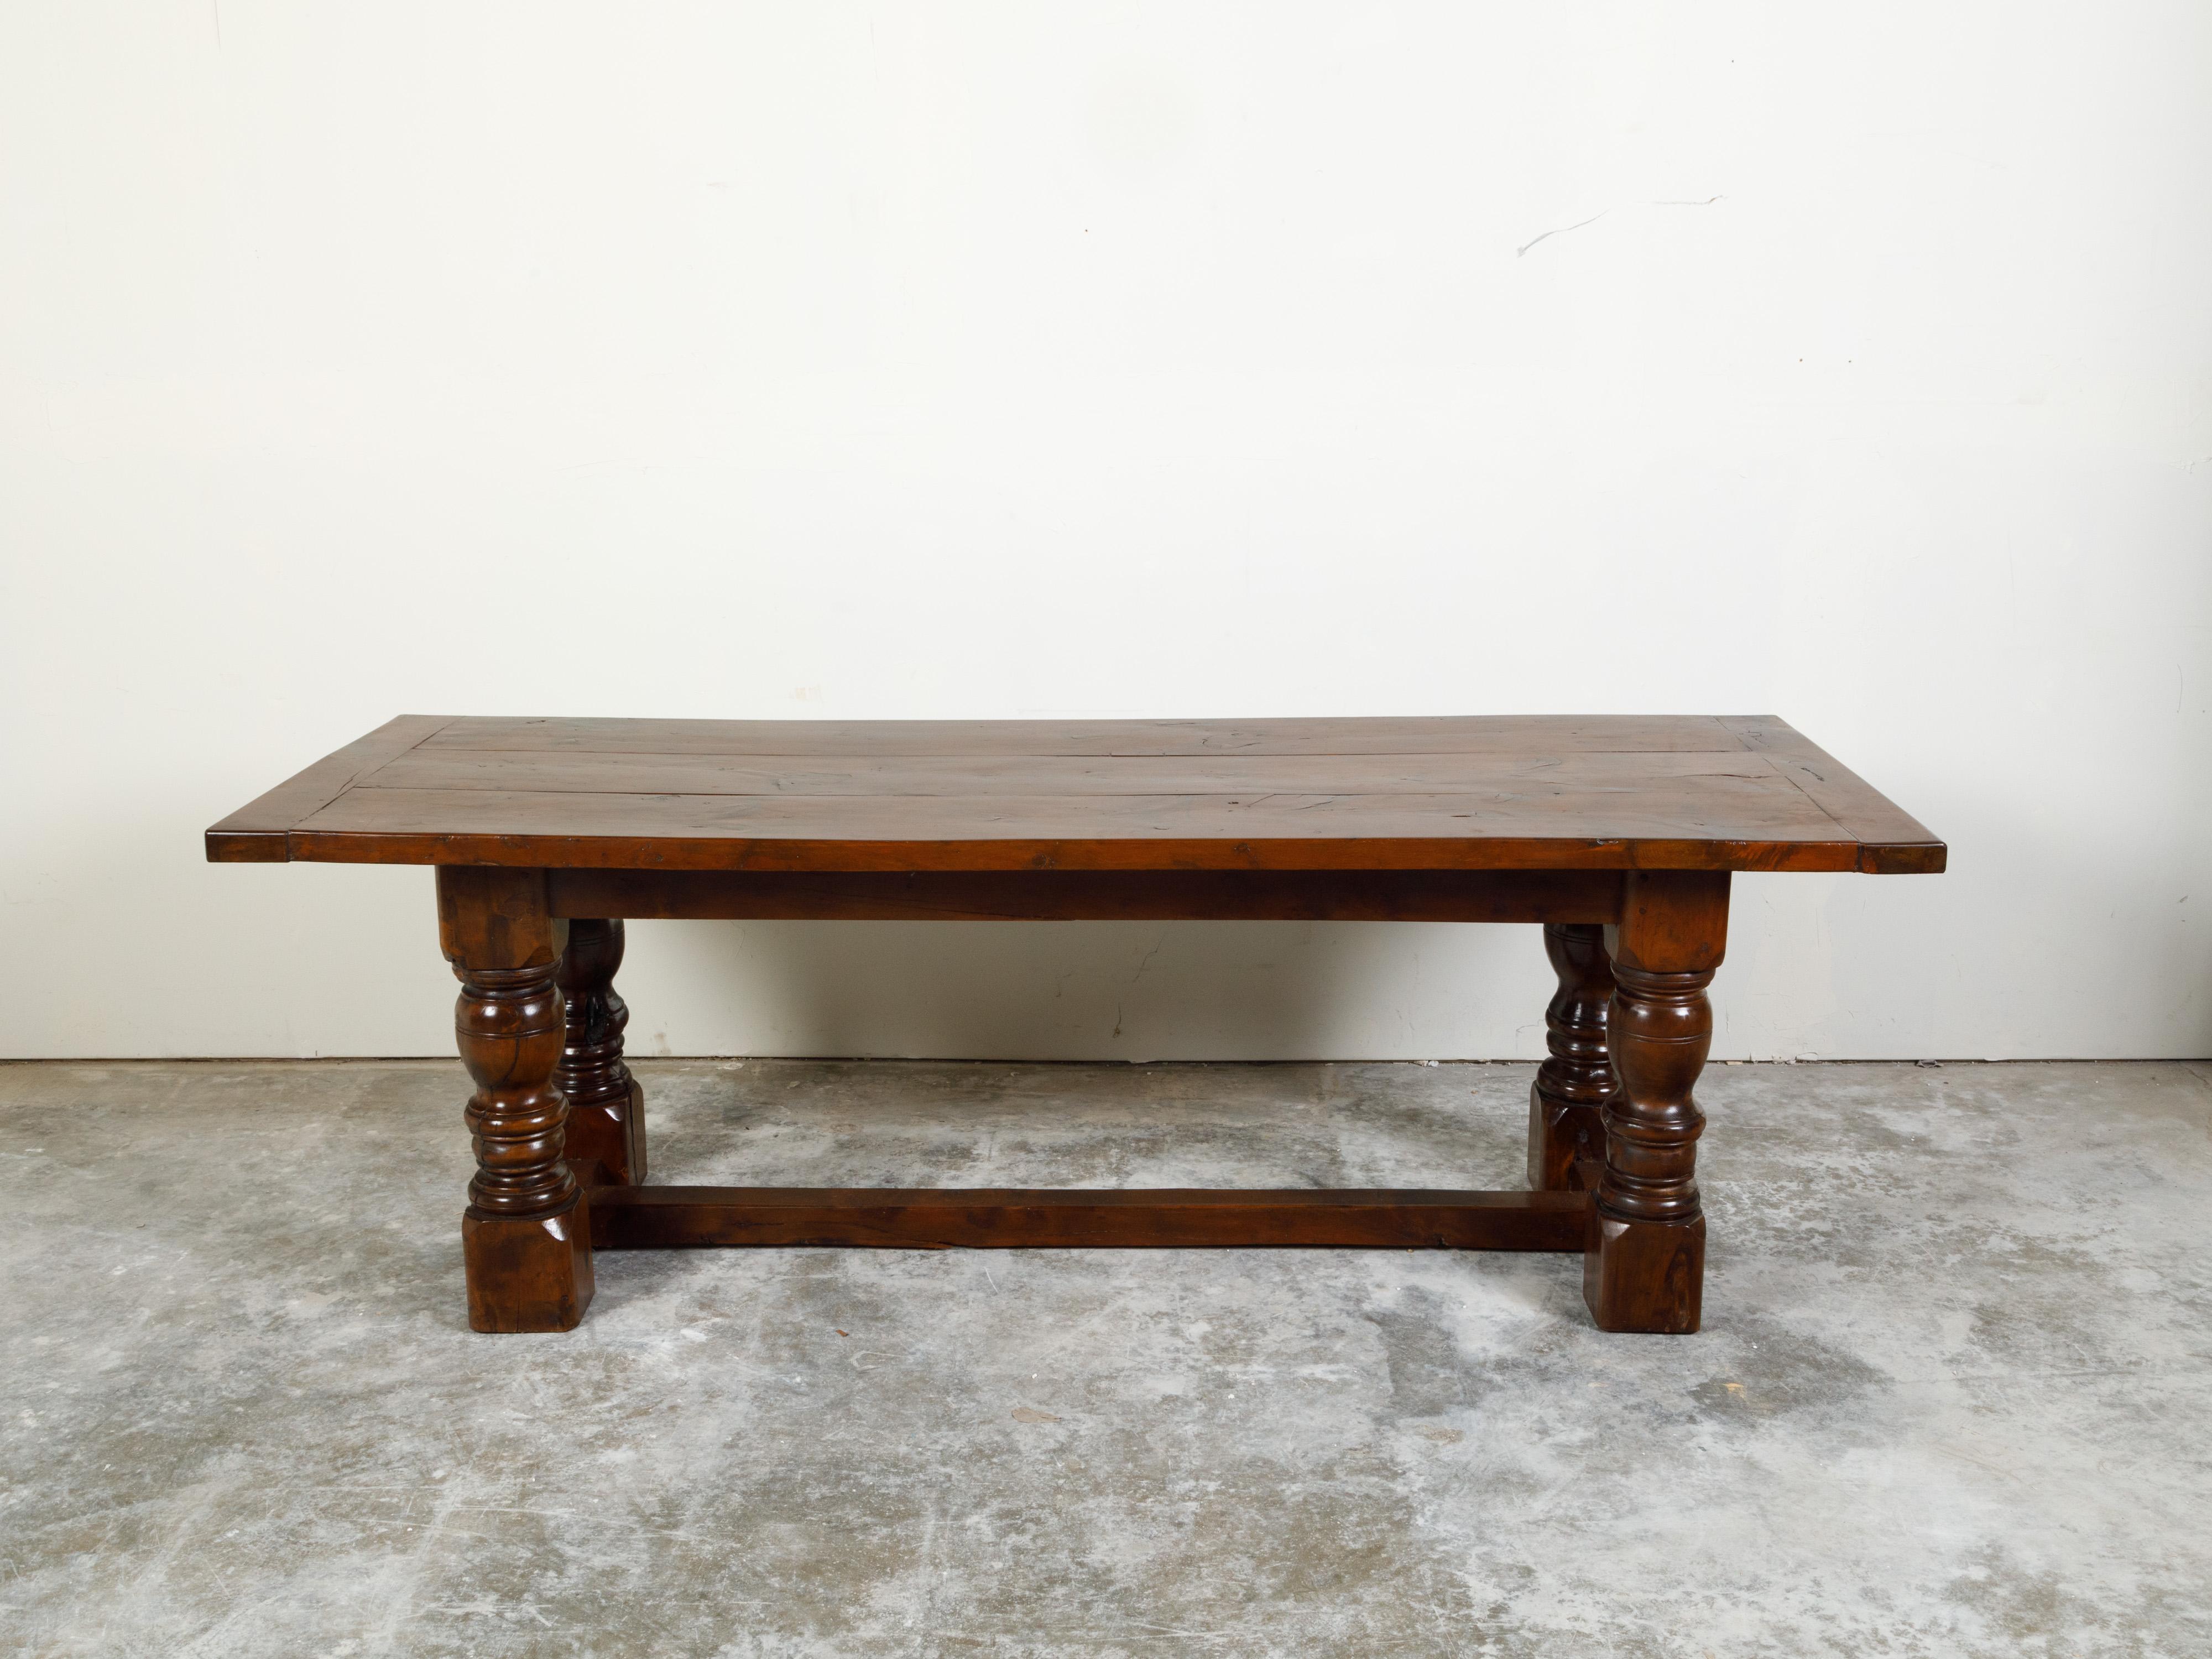 An English walnut dining table from the 19th century, with turned legs and H-Form cross stretcher. Created in England during the 19th century, this walnut table features a rectangular planked top sitting above four turned legs connected to one